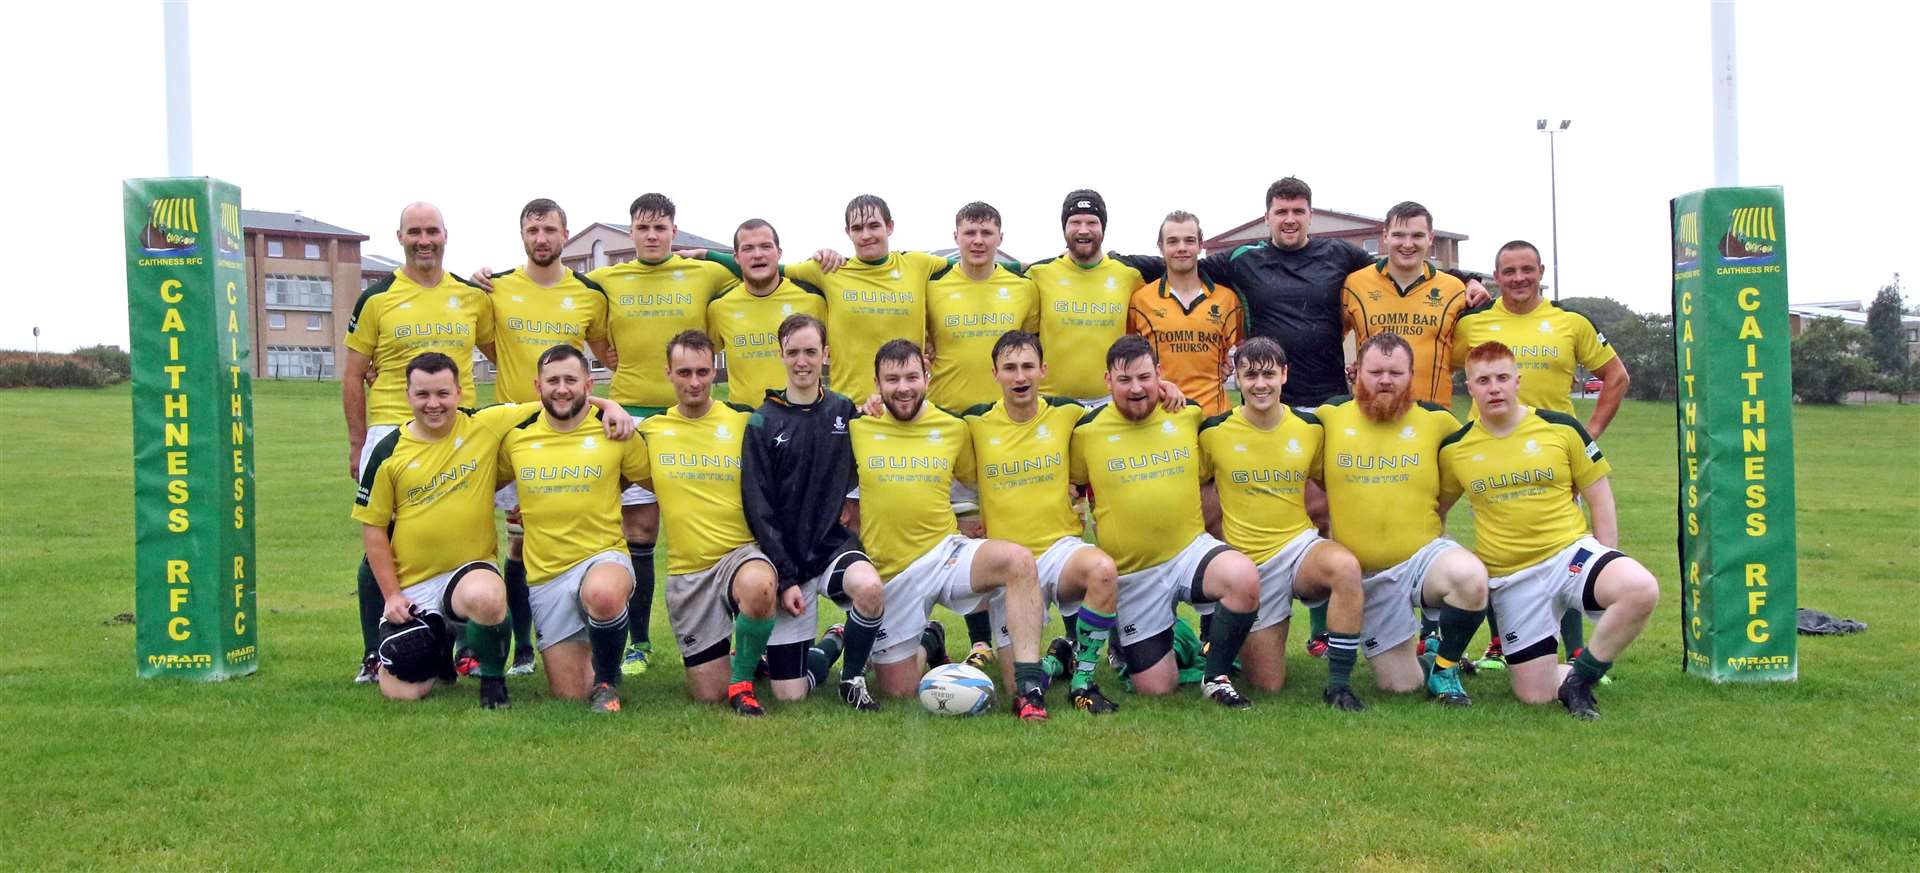 The Caithness RFC 2nd XV. Picture: James Gunn